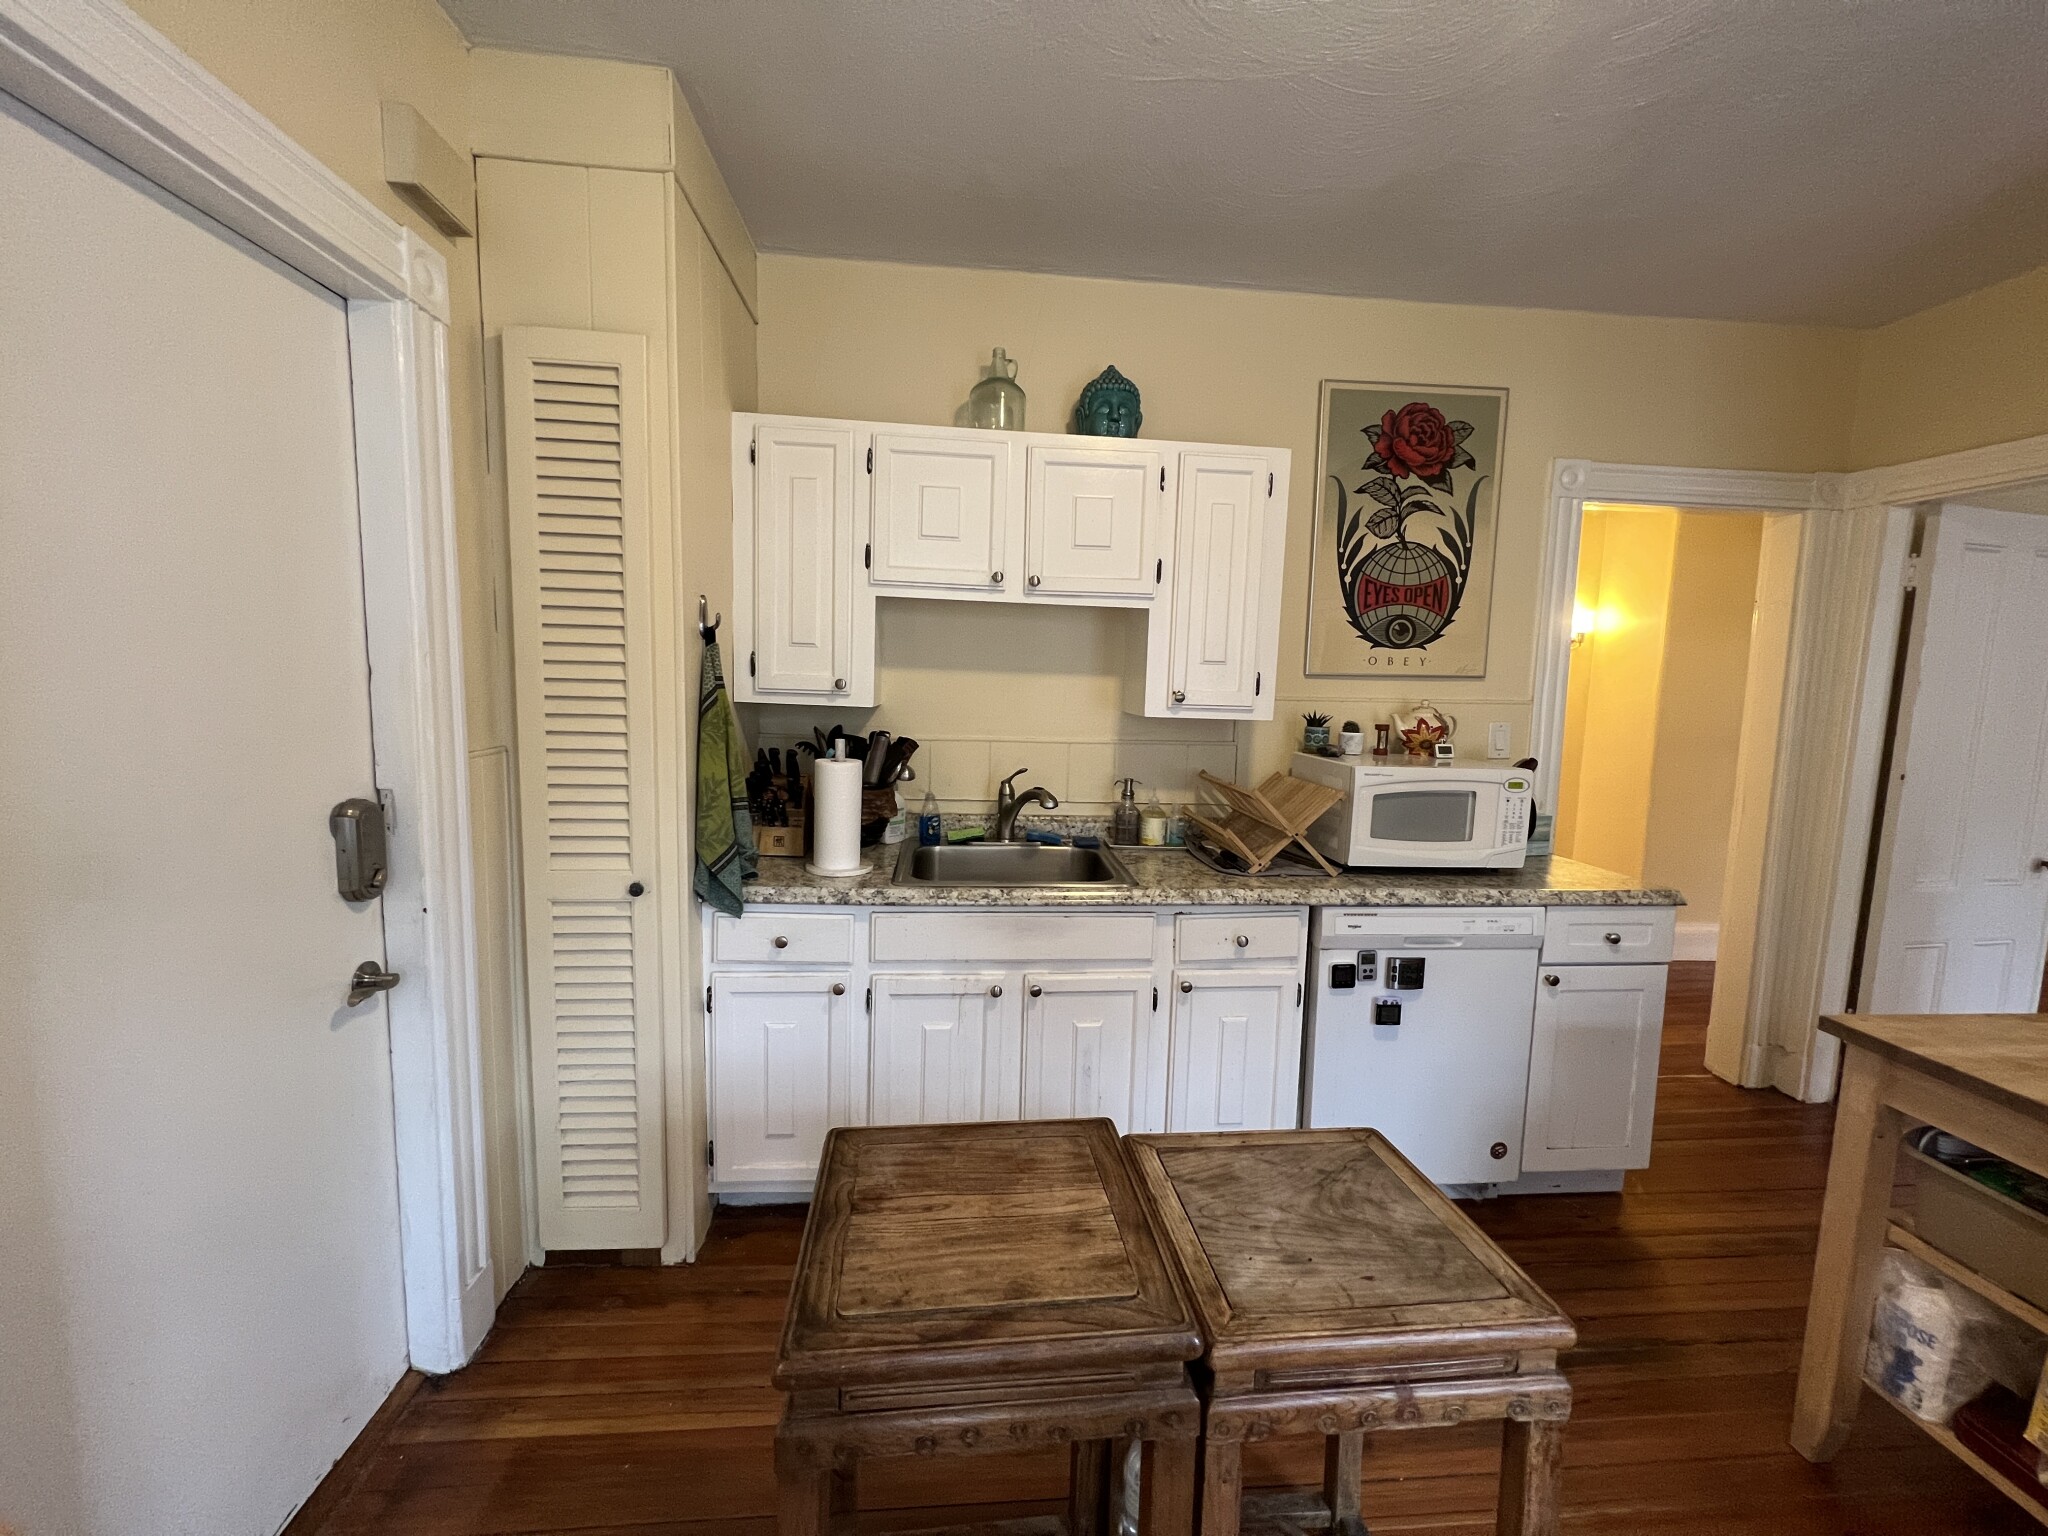 Photos of apartment on Gilson Ter.,Somerville MA 02144